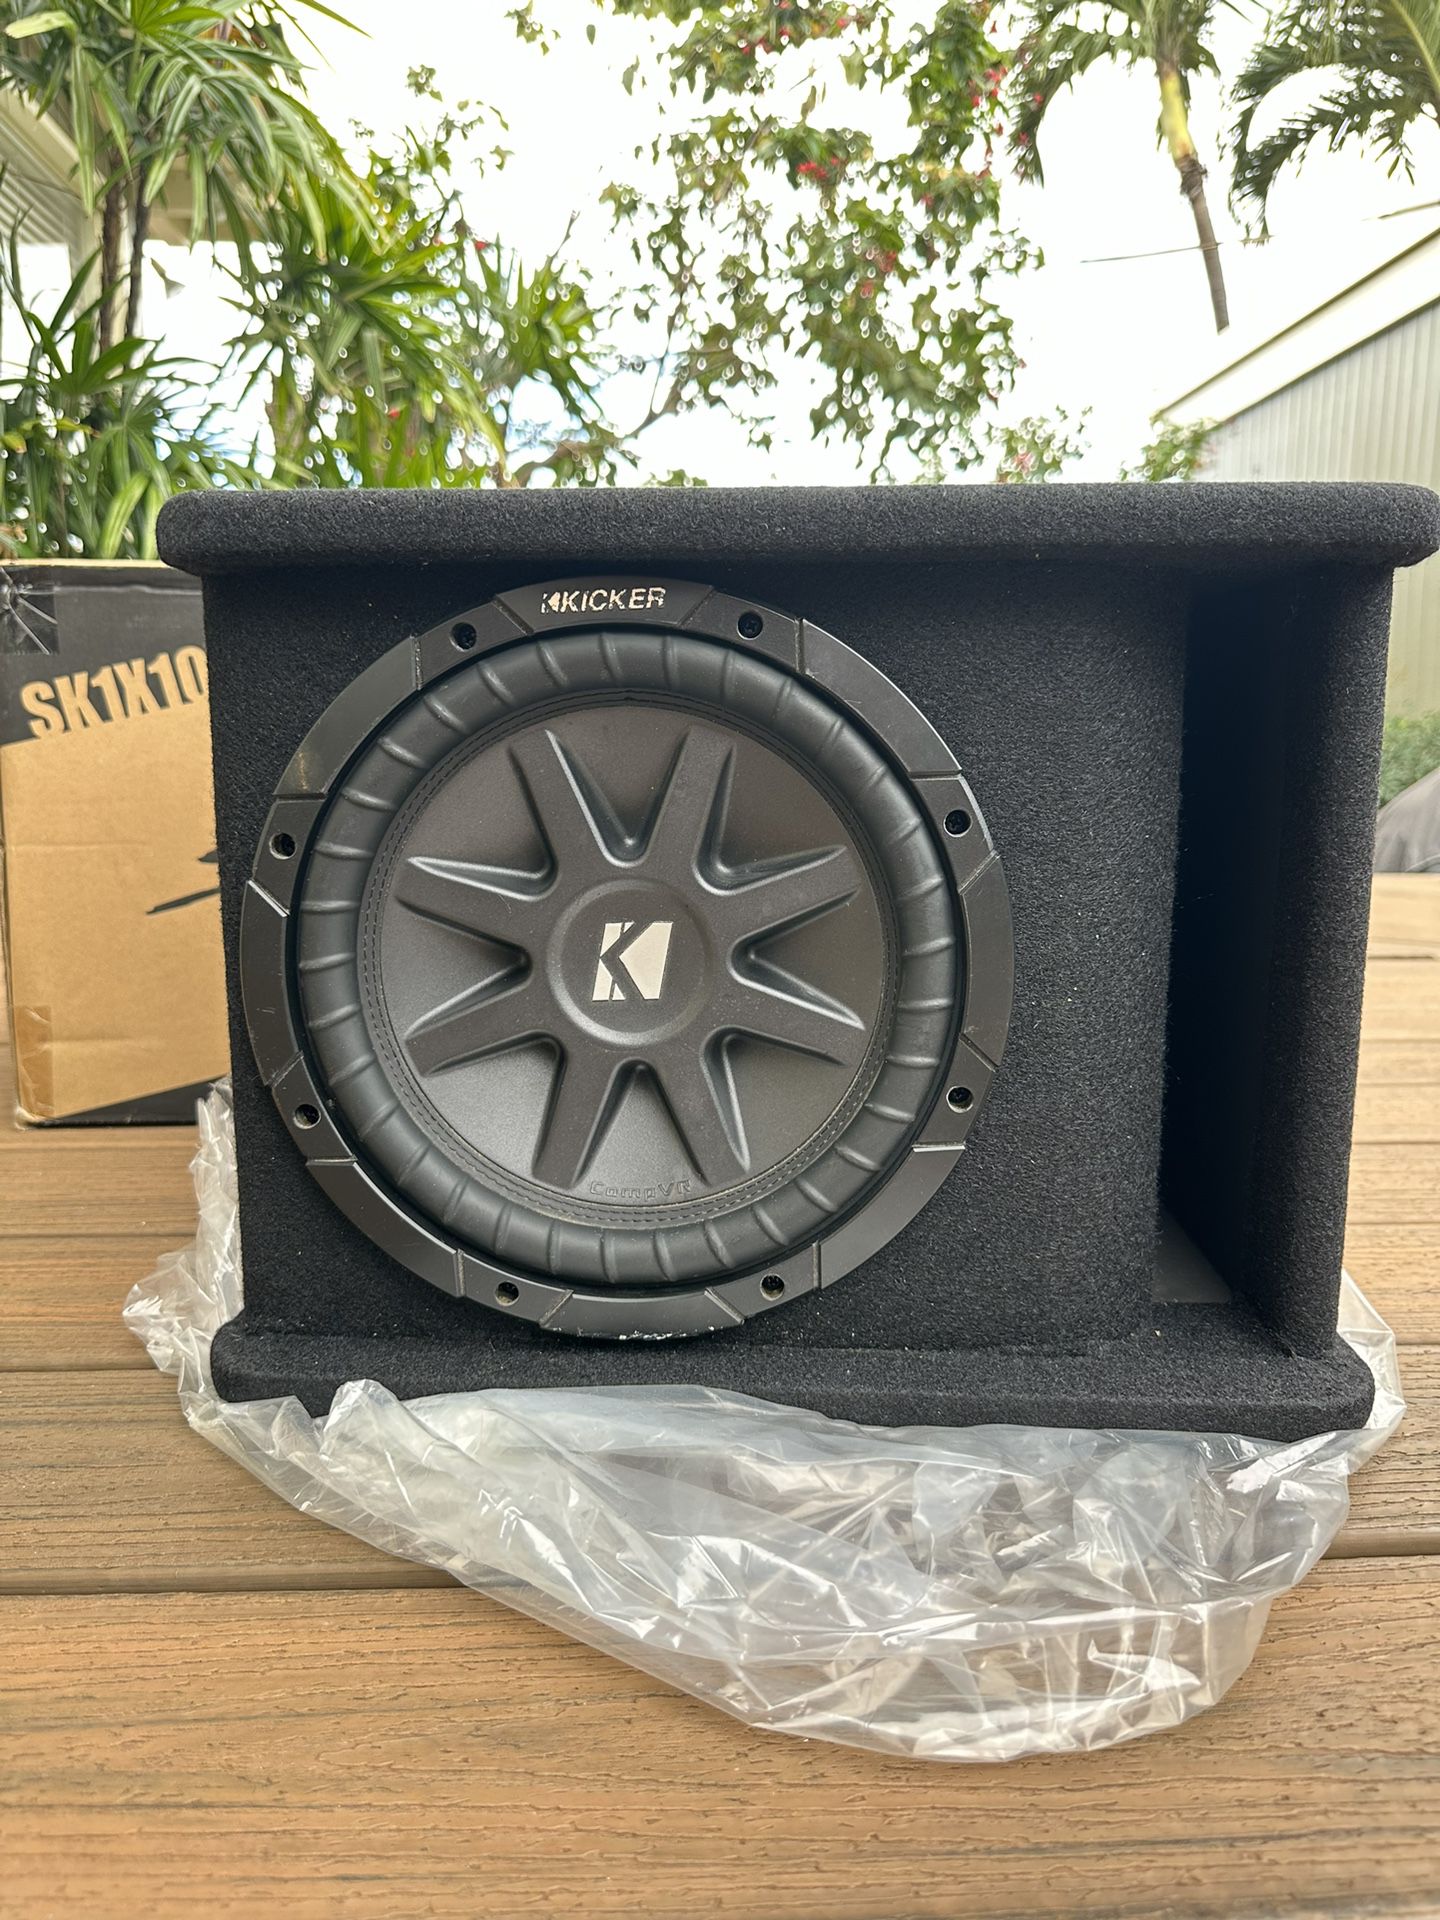 10” Kicker Subwoofer In Ported Box